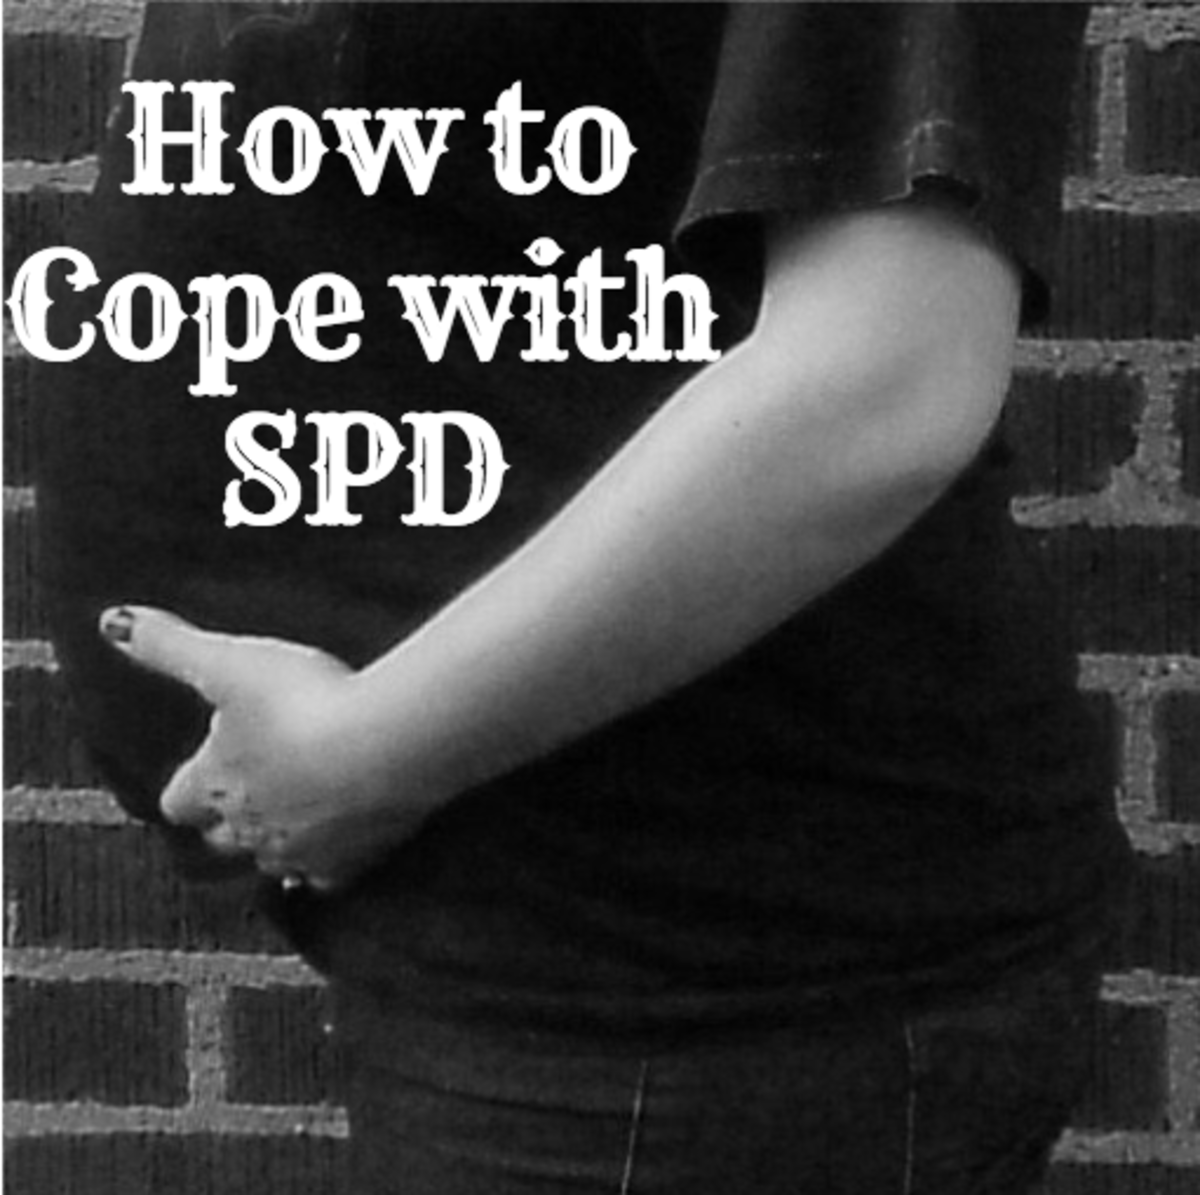 Symphysis Pubis Dysfunction (SPD) in Pregnancy and How to Cope